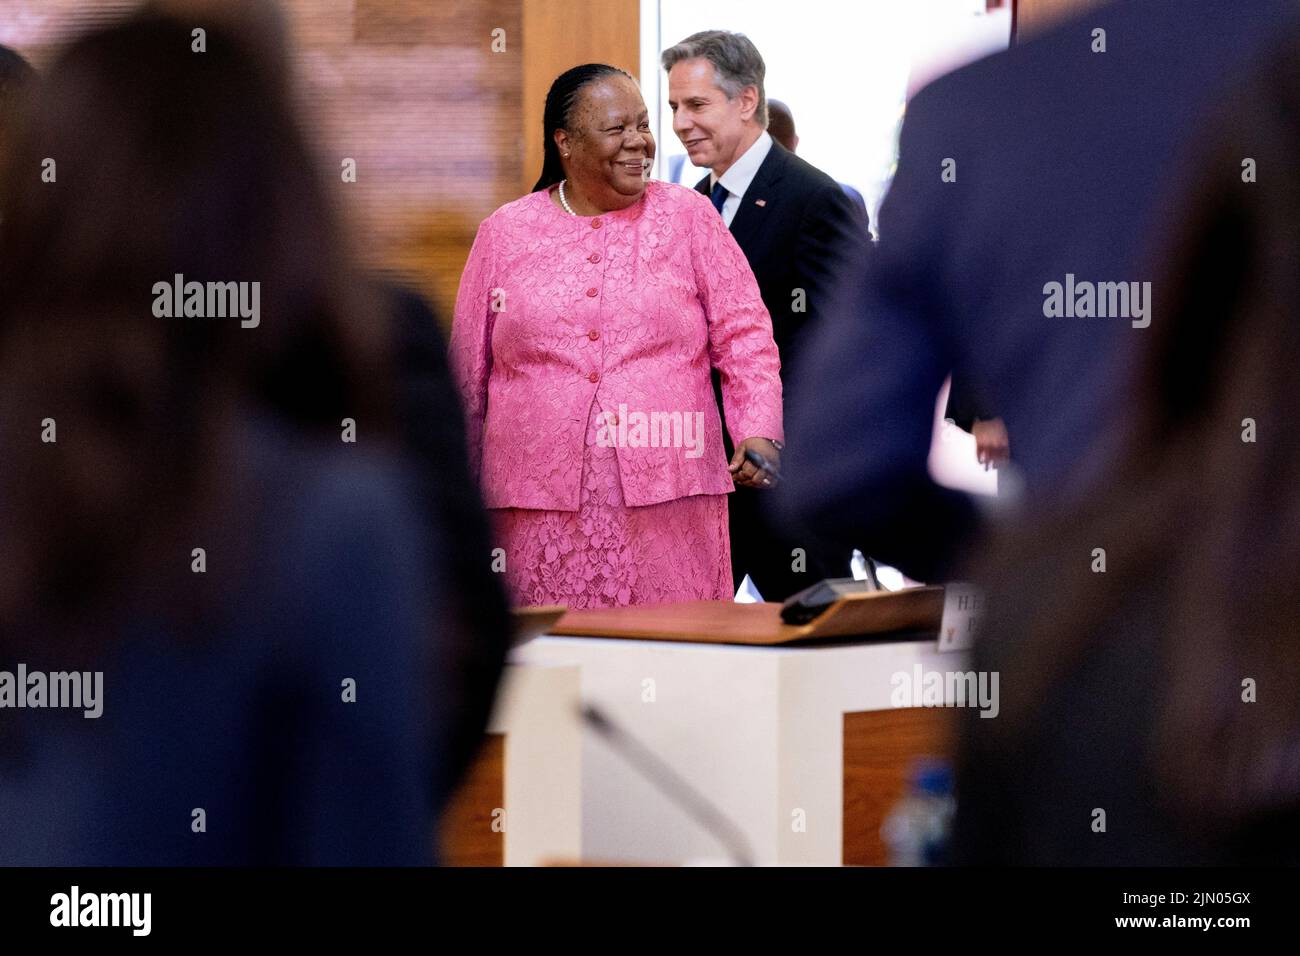 South Africa's Foreign Minister Naledi Pandor and U.S. Secretary of State Antony Blinken arrive at a strategic dialogue opening session meeting at the South African Department of International Relations and Cooperation in Pretoria, South Africa, August 8, 2022. Andrew Harnik/Pool via REUTERS Stock Photo